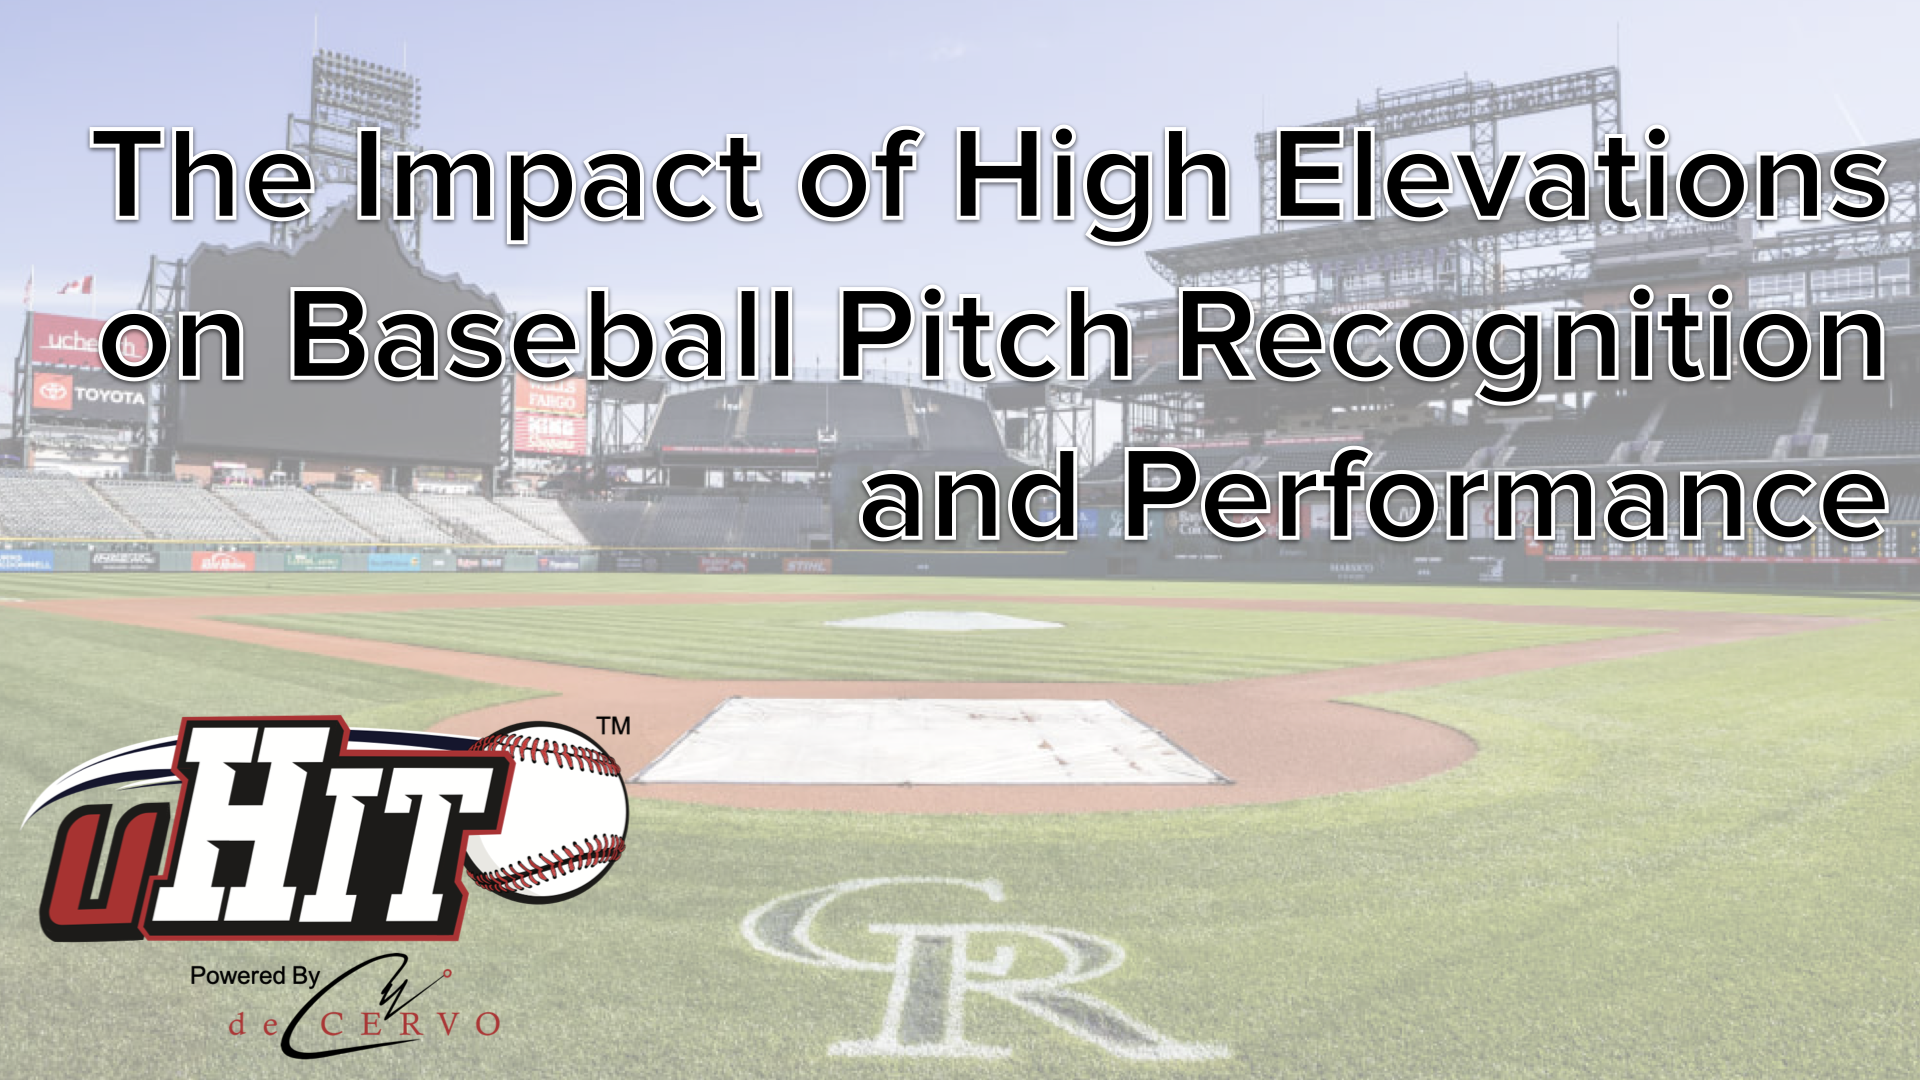 The Impact of High Elevations on Baseball Pitch Recognition and Performance